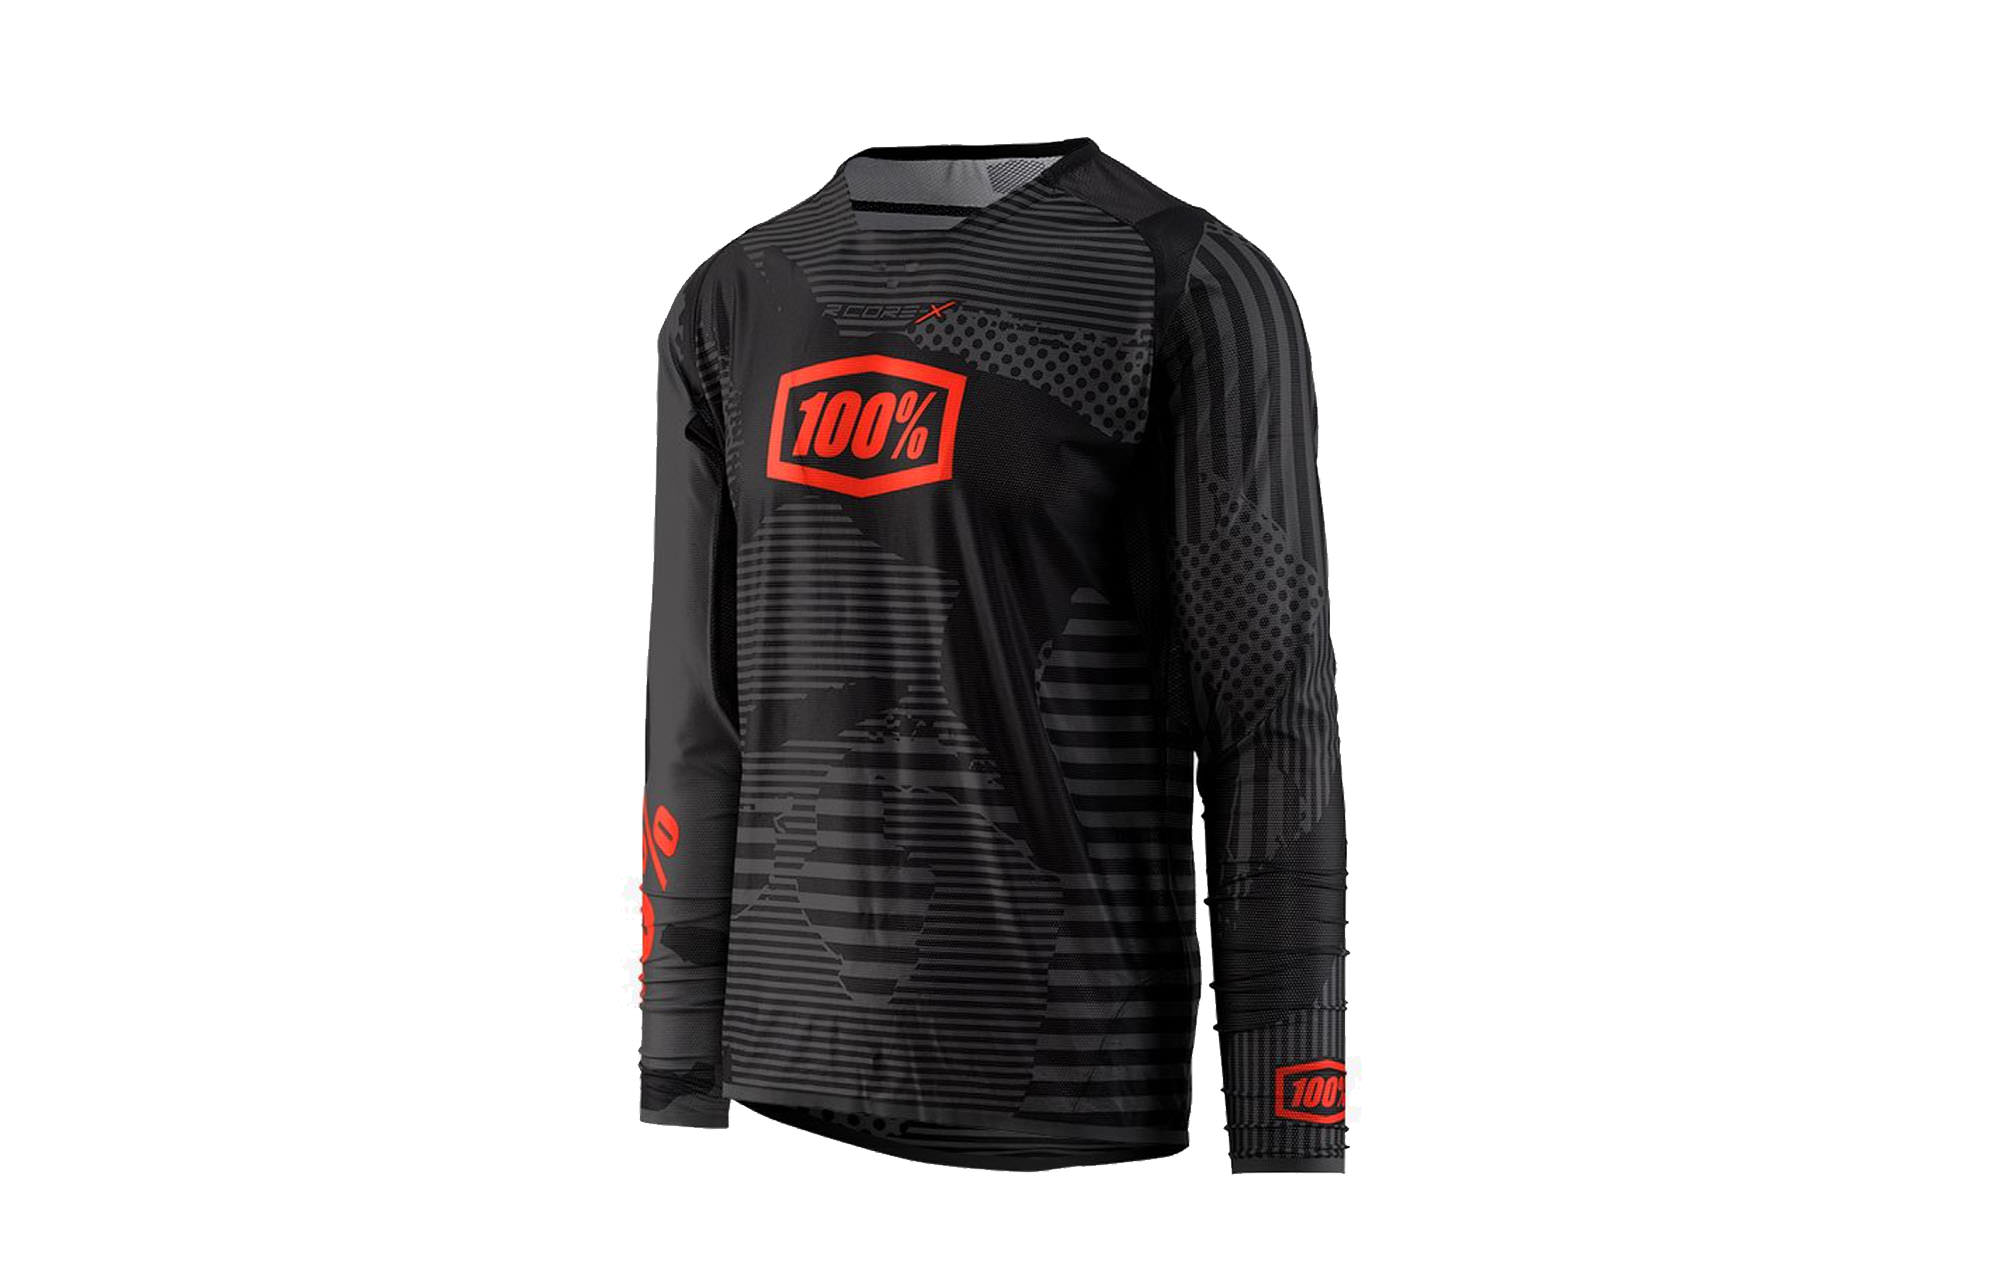 100% R-CORE-X DH LONG SLEEVE JERSEY BLACK CAMO image number 0